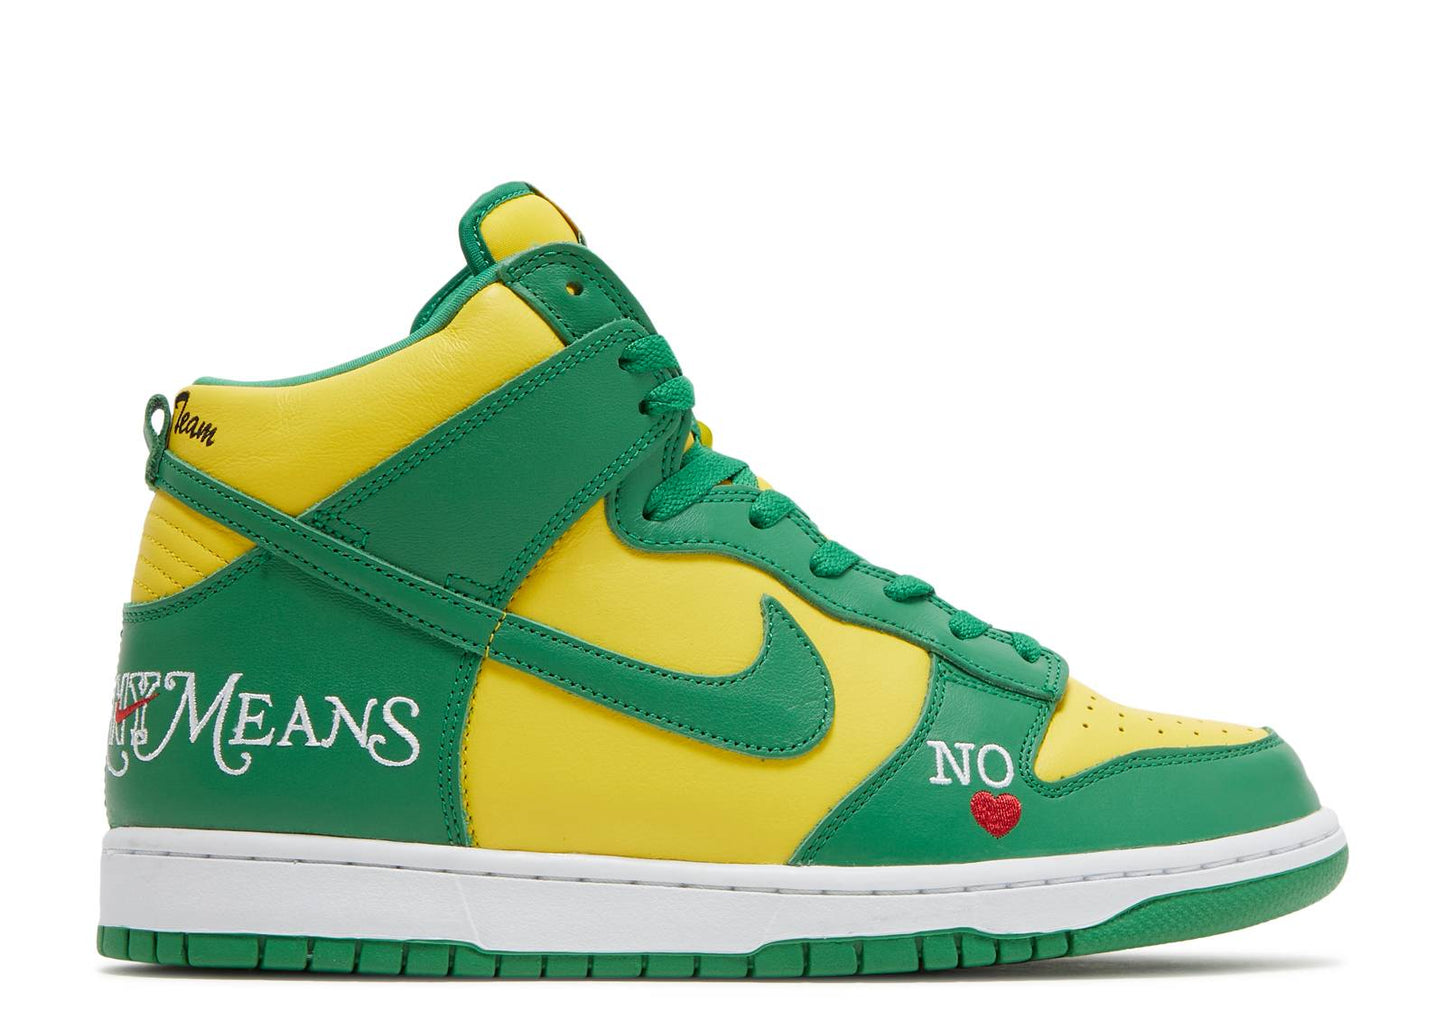 Supreme x Dunk High SB By Any Means - Brazil